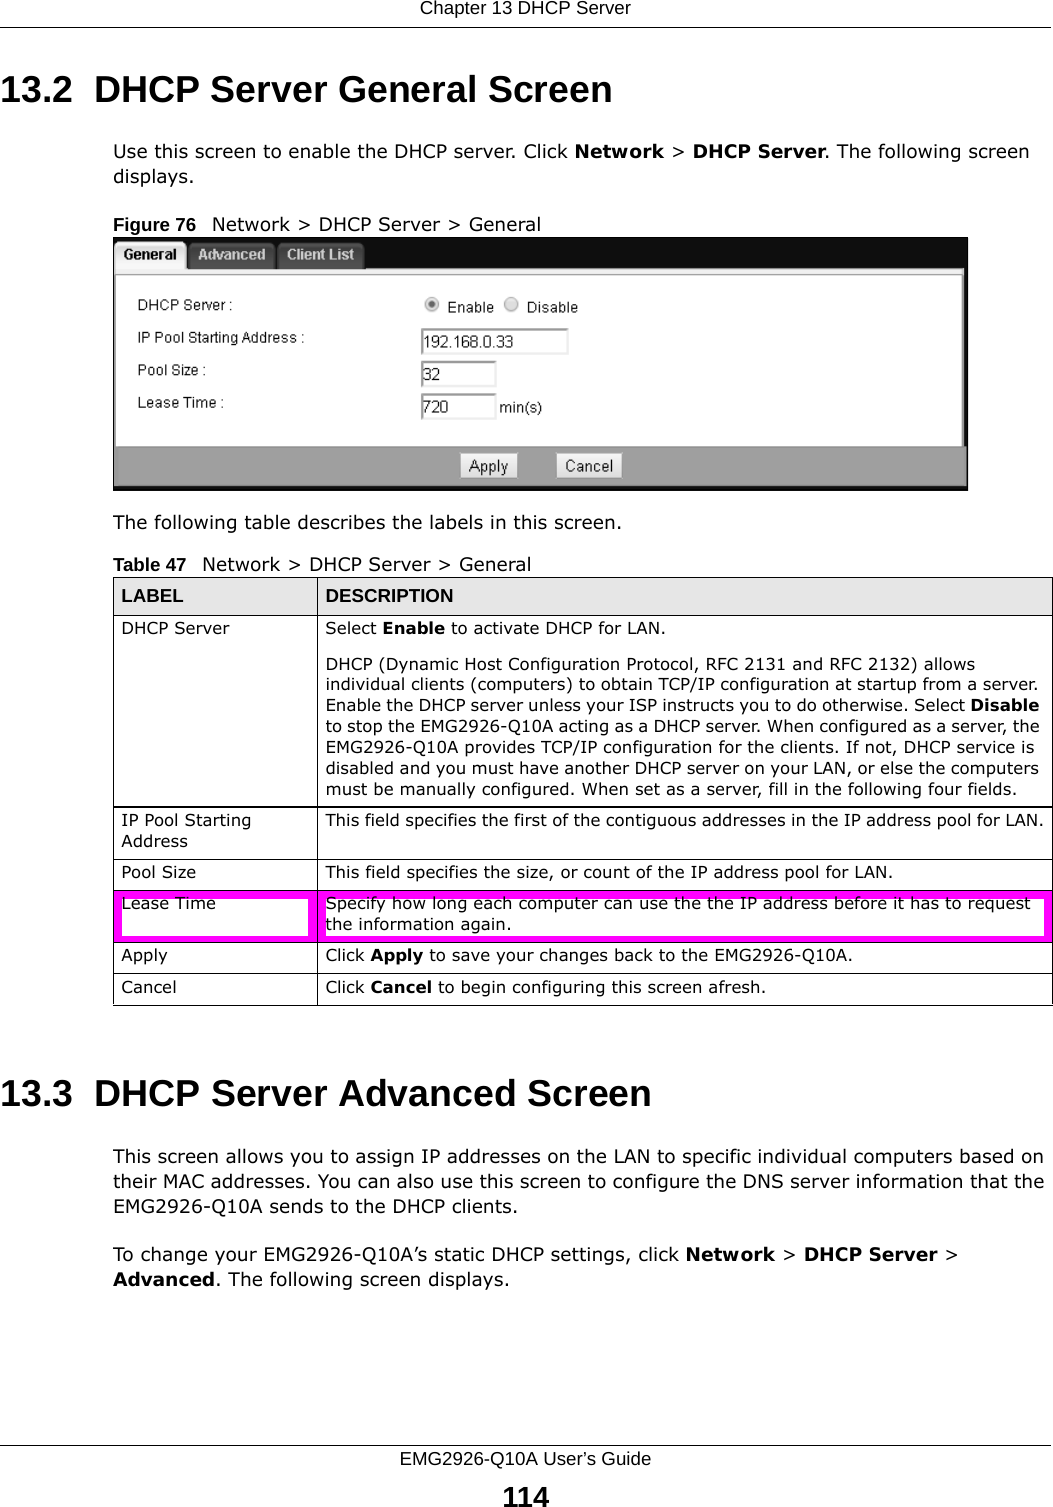 Chapter 13 DHCP ServerEMG2926-Q10A User’s Guide11413.2  DHCP Server General ScreenUse this screen to enable the DHCP server. Click Network &gt; DHCP Server. The following screen displays.Figure 76   Network &gt; DHCP Server &gt; General   The following table describes the labels in this screen.13.3  DHCP Server Advanced Screen    This screen allows you to assign IP addresses on the LAN to specific individual computers based on their MAC addresses. You can also use this screen to configure the DNS server information that the EMG2926-Q10A sends to the DHCP clients.To change your EMG2926-Q10A’s static DHCP settings, click Network &gt; DHCP Server &gt; Advanced. The following screen displays.Table 47   Network &gt; DHCP Server &gt; General  LABEL DESCRIPTIONDHCP Server Select Enable to activate DHCP for LAN.DHCP (Dynamic Host Configuration Protocol, RFC 2131 and RFC 2132) allows individual clients (computers) to obtain TCP/IP configuration at startup from a server. Enable the DHCP server unless your ISP instructs you to do otherwise. Select Disable to stop the EMG2926-Q10A acting as a DHCP server. When configured as a server, the EMG2926-Q10A provides TCP/IP configuration for the clients. If not, DHCP service is disabled and you must have another DHCP server on your LAN, or else the computers must be manually configured. When set as a server, fill in the following four fields.IP Pool Starting AddressThis field specifies the first of the contiguous addresses in the IP address pool for LAN.Pool Size This field specifies the size, or count of the IP address pool for LAN.Lease Time Specify how long each computer can use the the IP address before it has to request the information again. Apply Click Apply to save your changes back to the EMG2926-Q10A.Cancel Click Cancel to begin configuring this screen afresh.